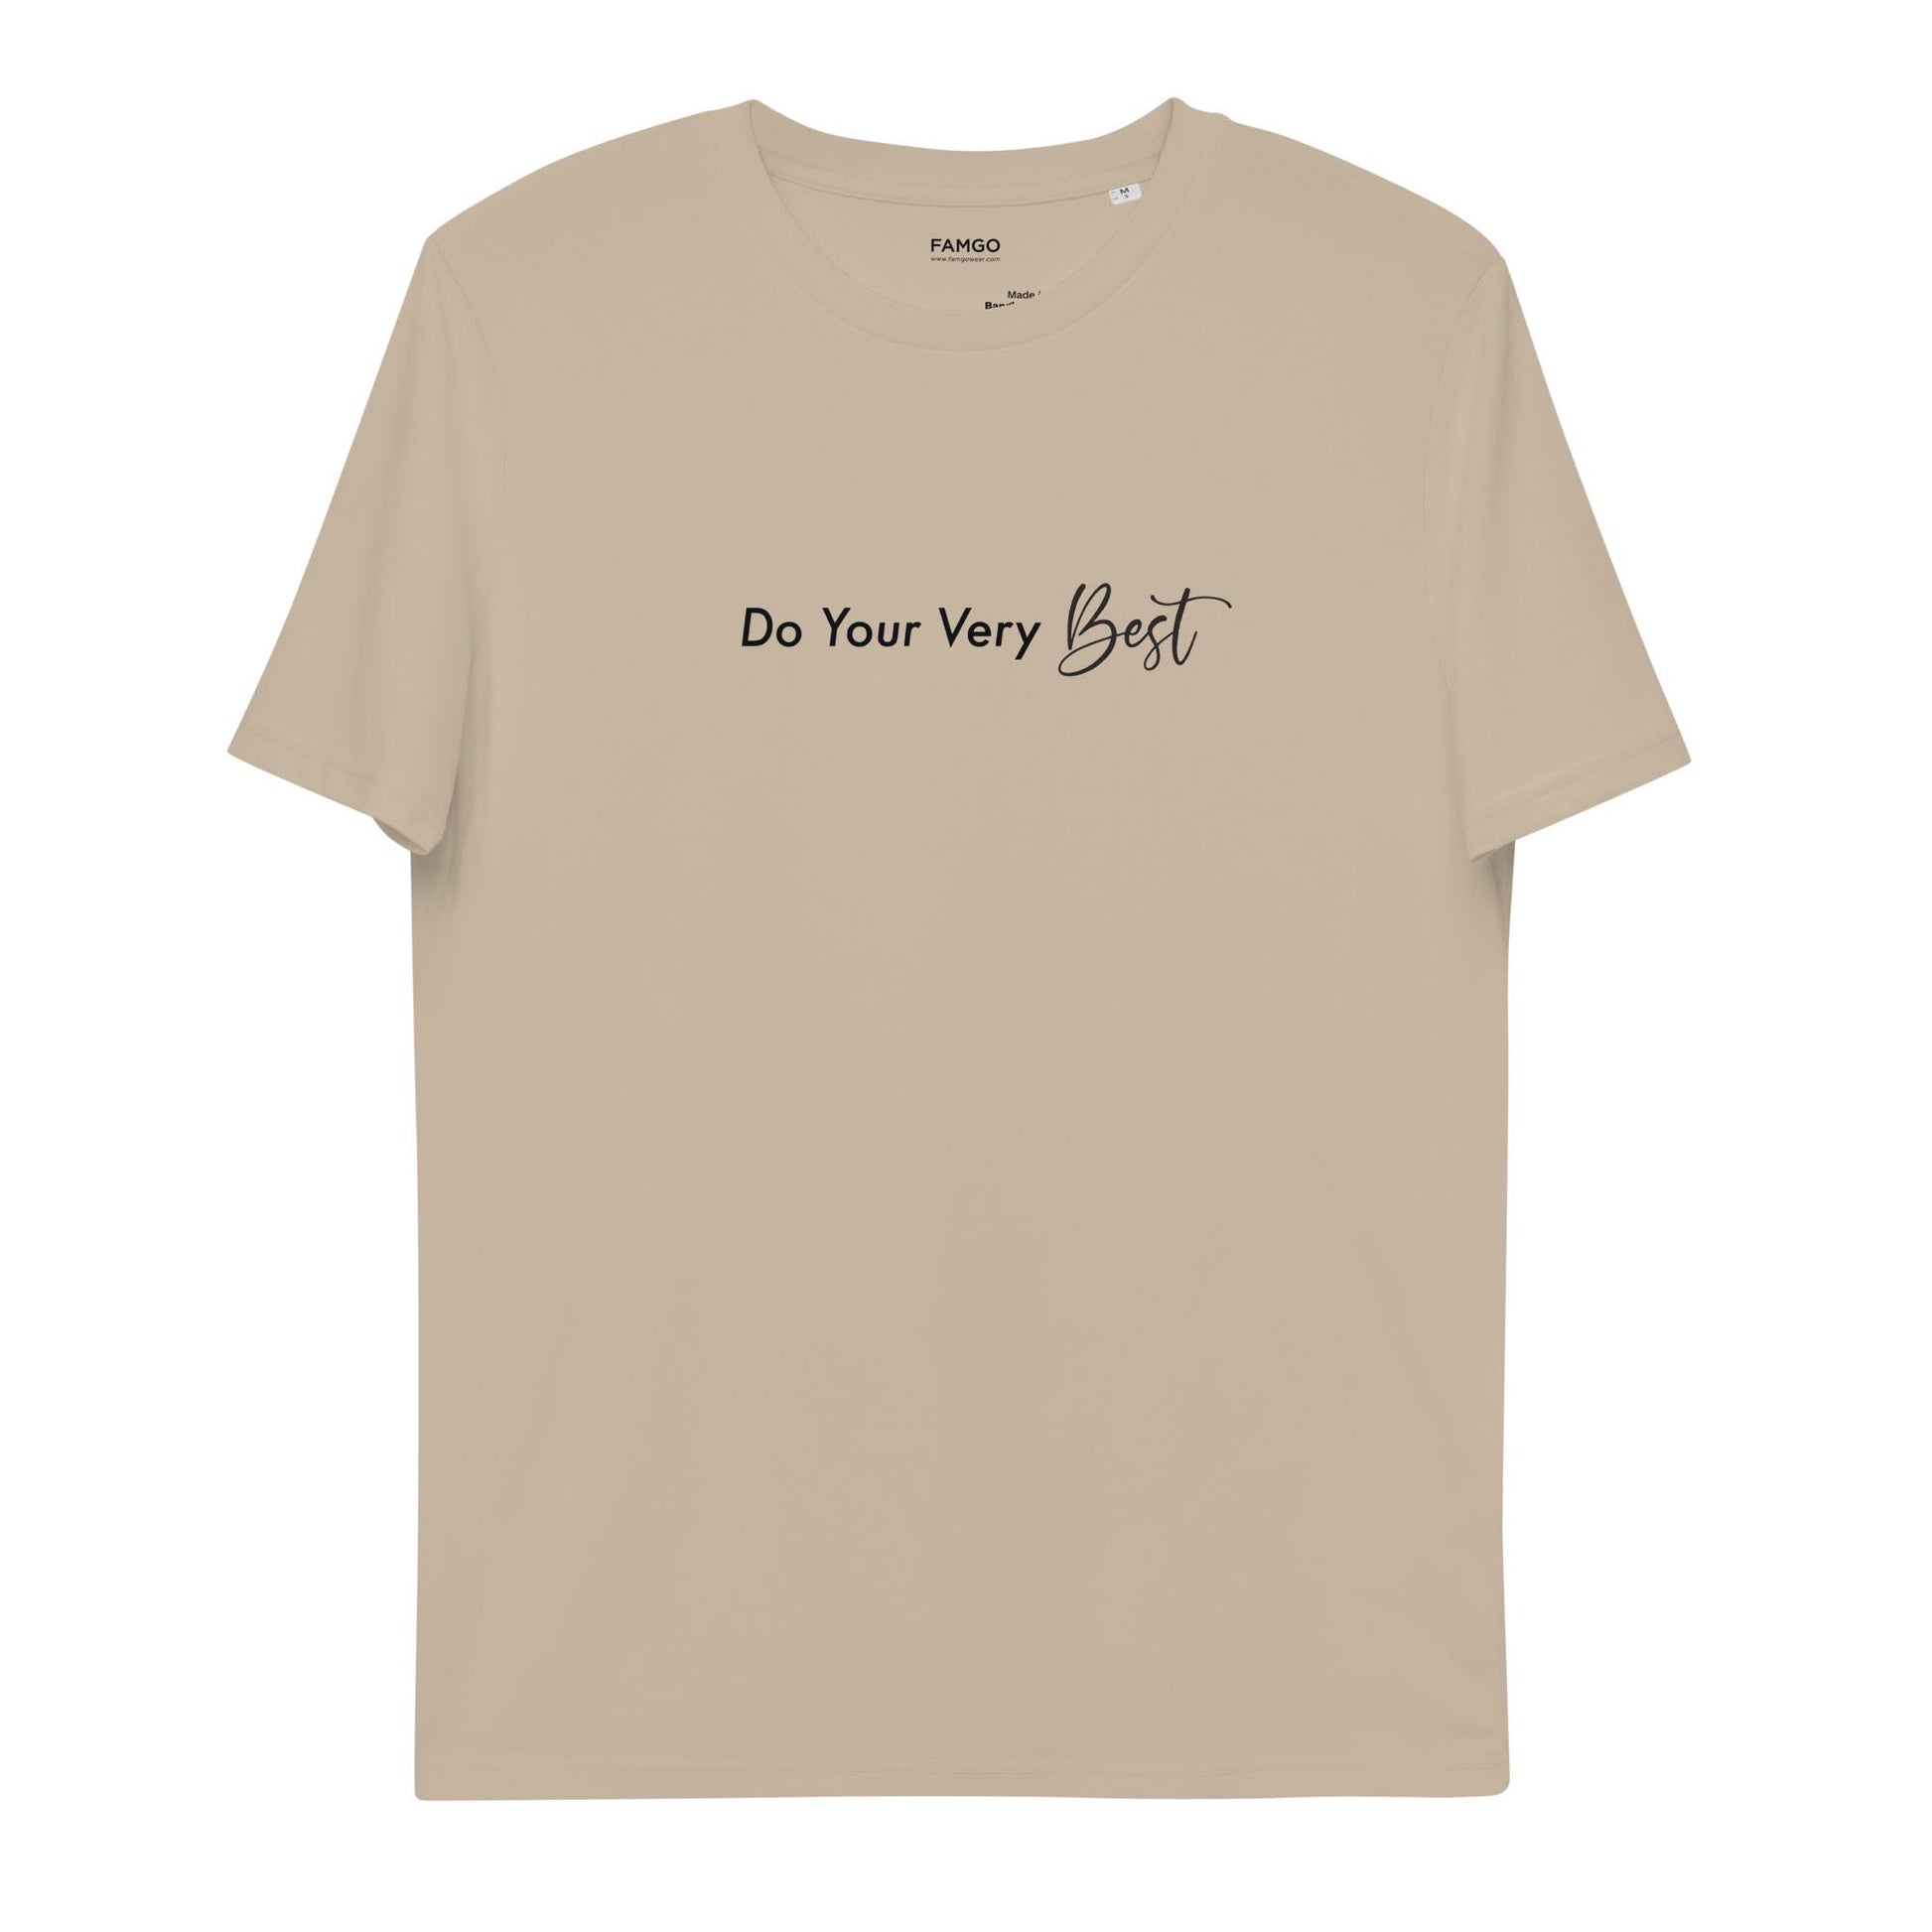 Women beige motivational t-shirt with motivational quote, "Do Your Very Best."